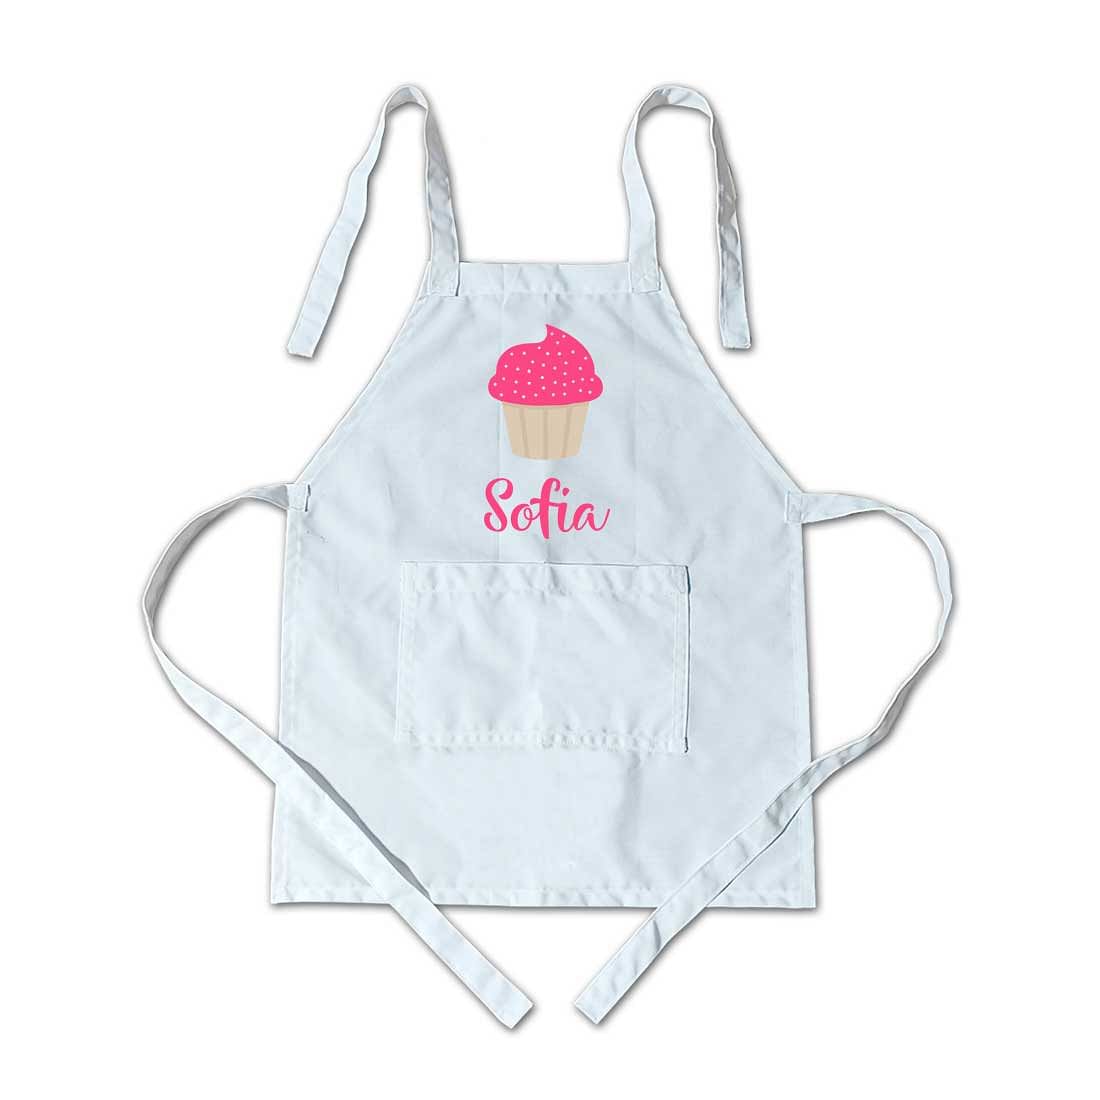 Customized Little Kids Apron With Name - Ice-Cream Nutcase